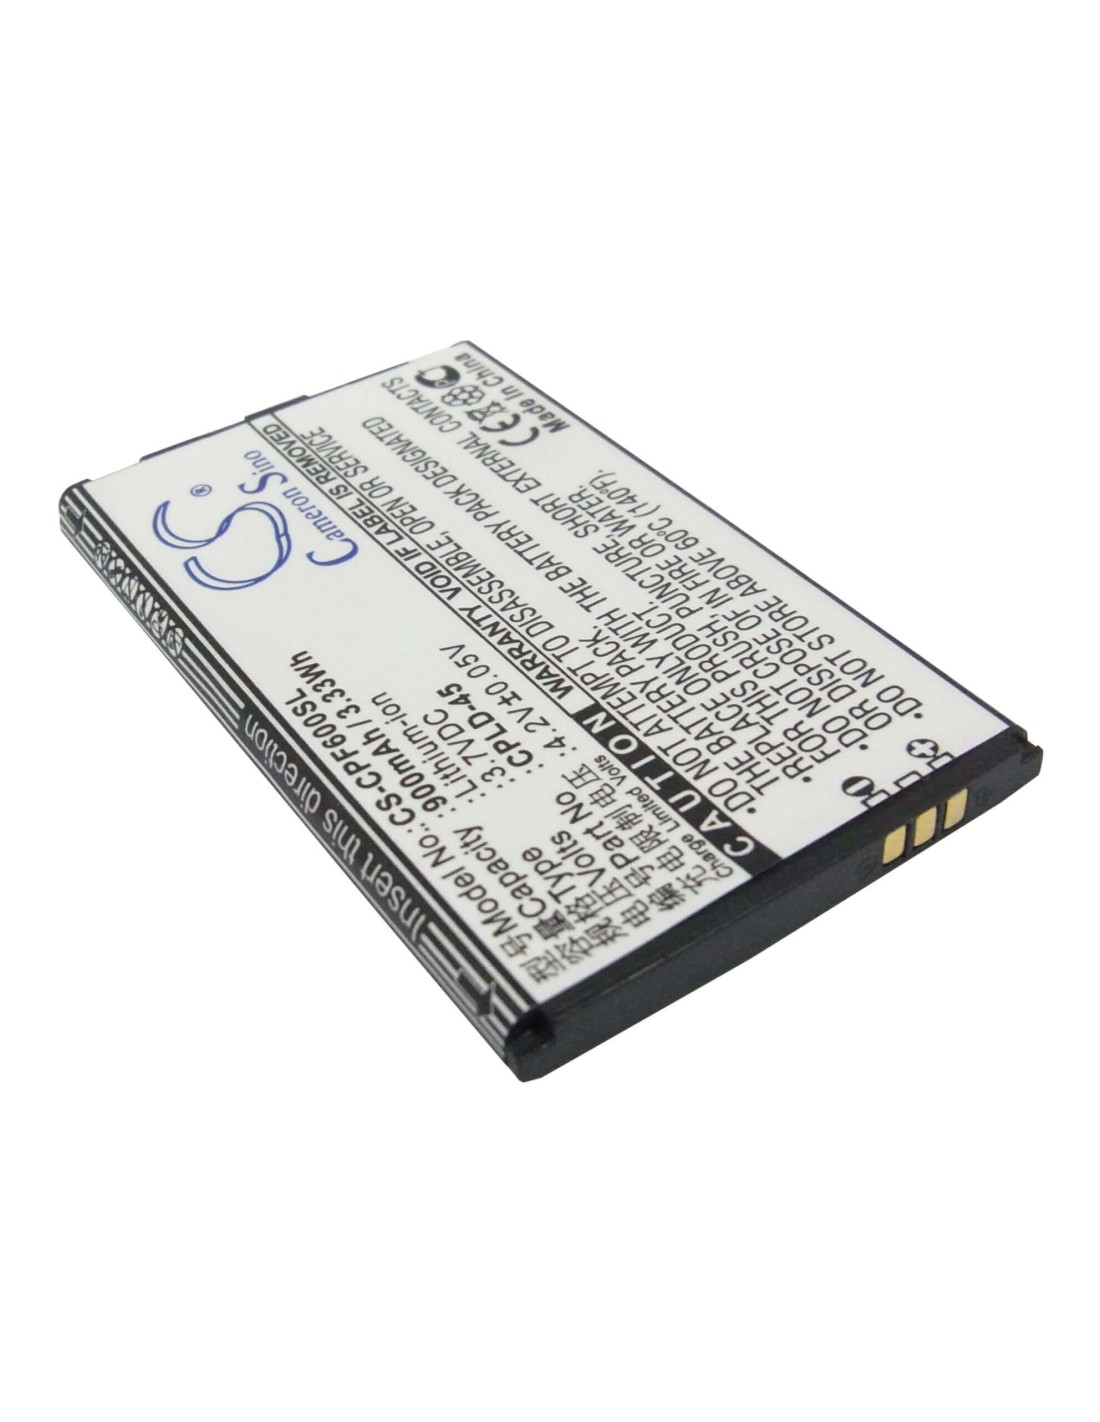 Battery for Coolpad F618, S180, E506 3.7V, 900mAh - 3.33Wh